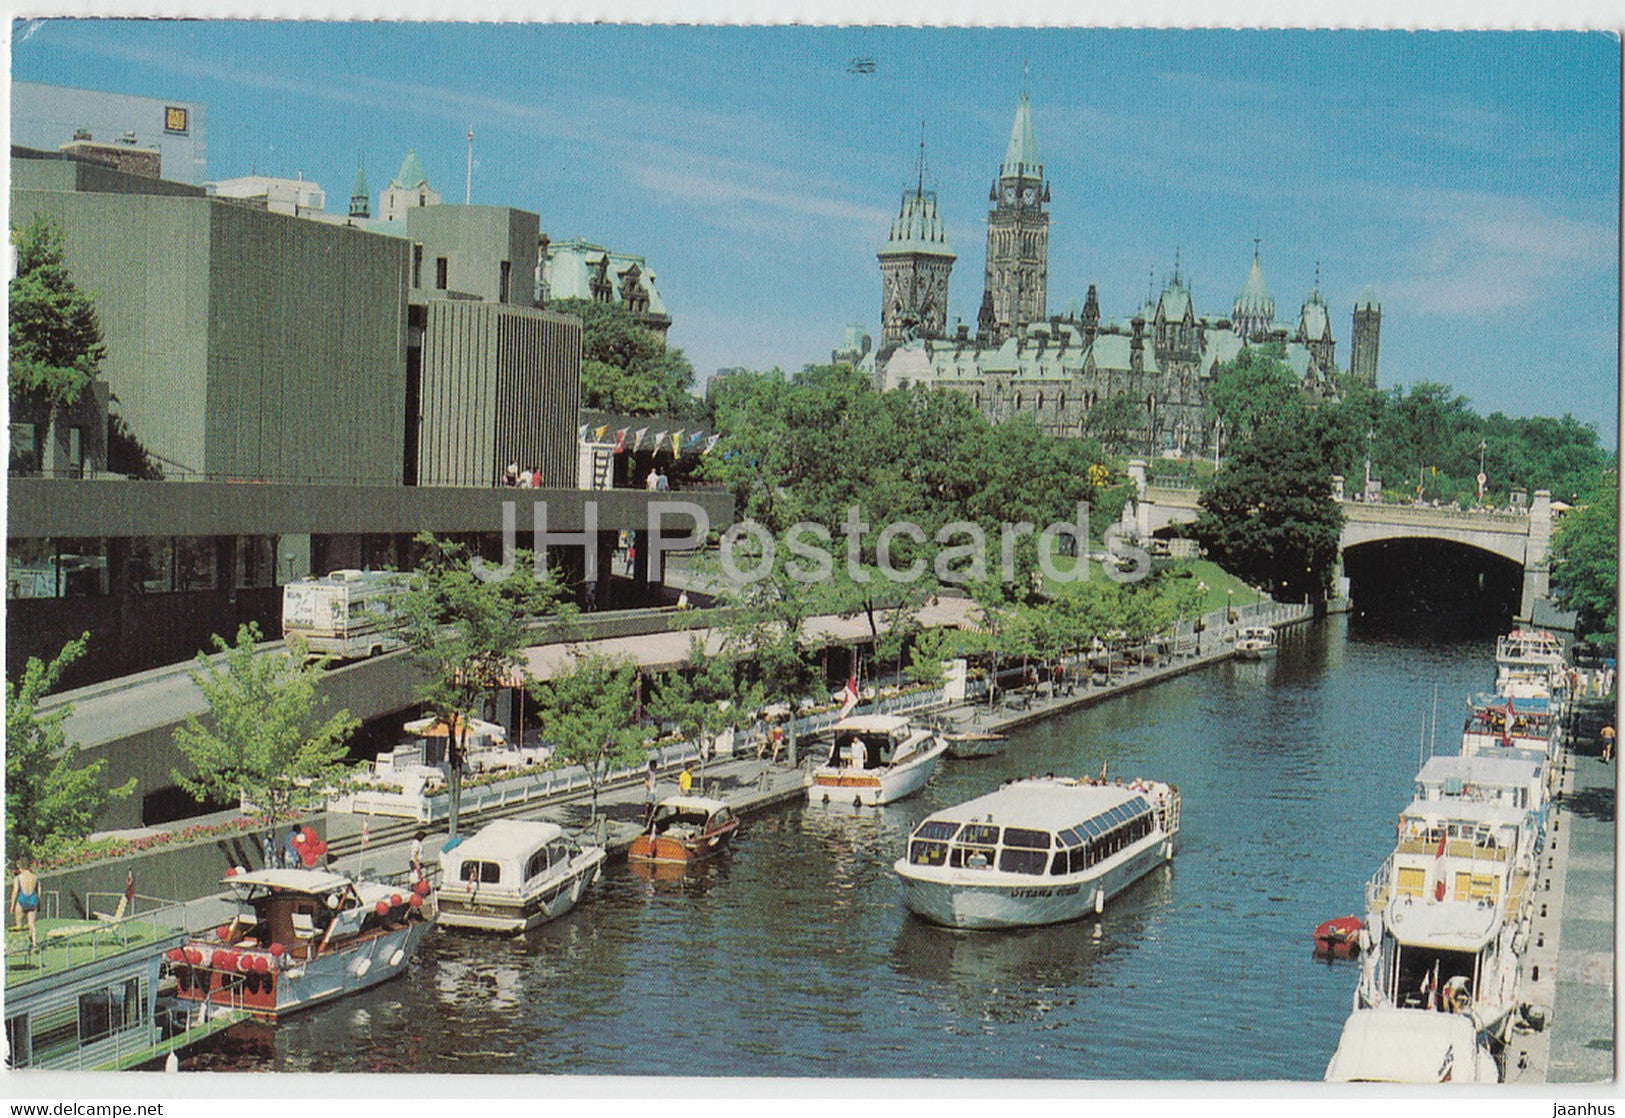 Ottawa - Rideau Canal and Parliament building - boat - 2002 - Canada - used - JH Postcards